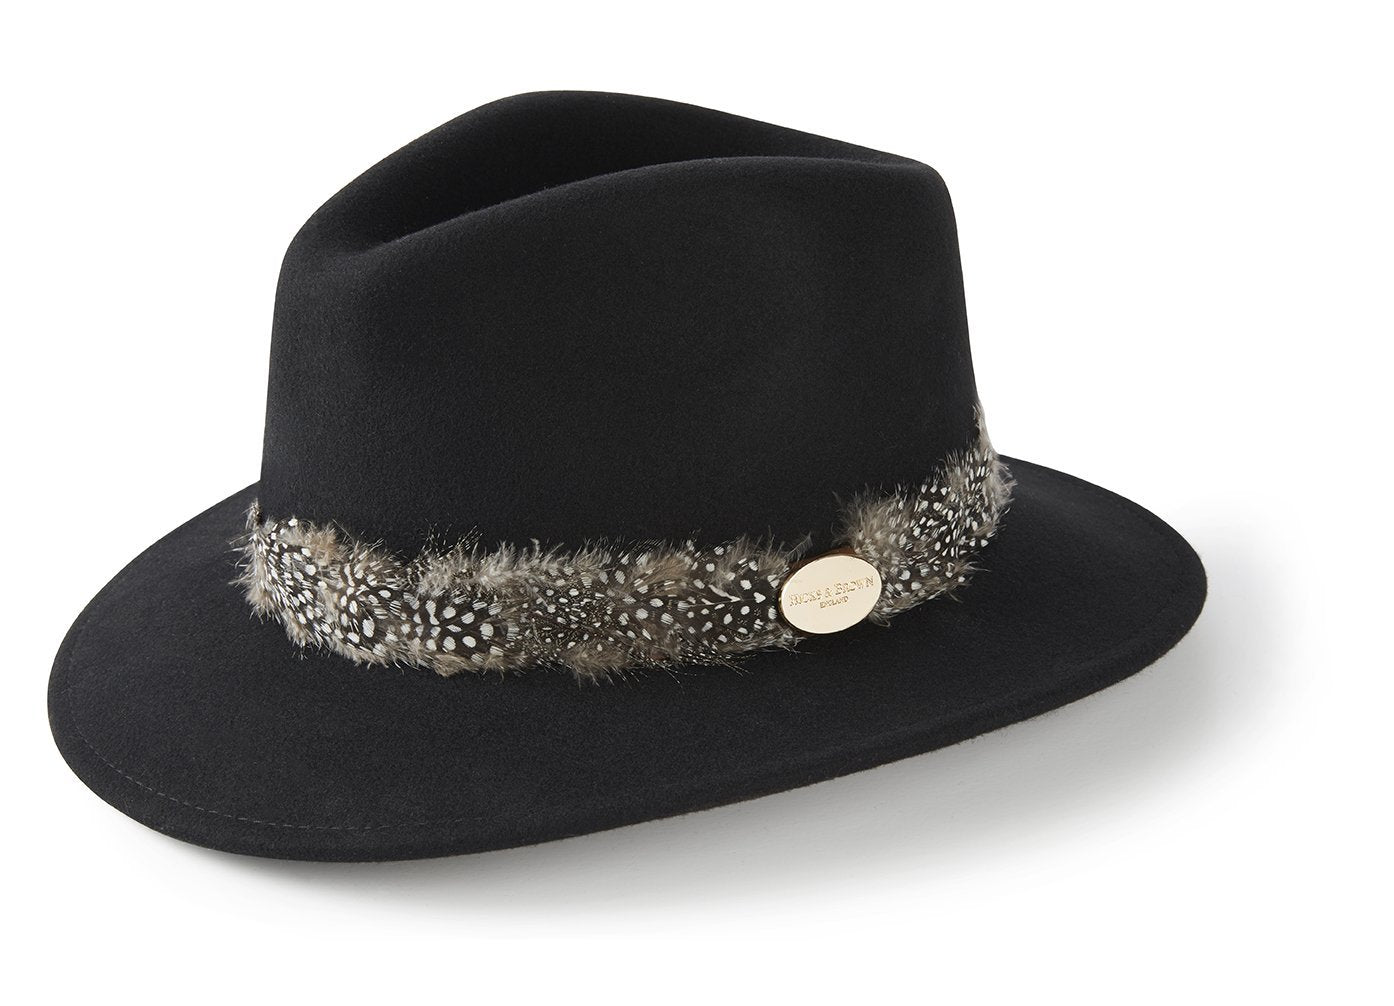 Hicks & Brown Fedora The Suffolk Fedora in Black (Guinea Feather Wrap)